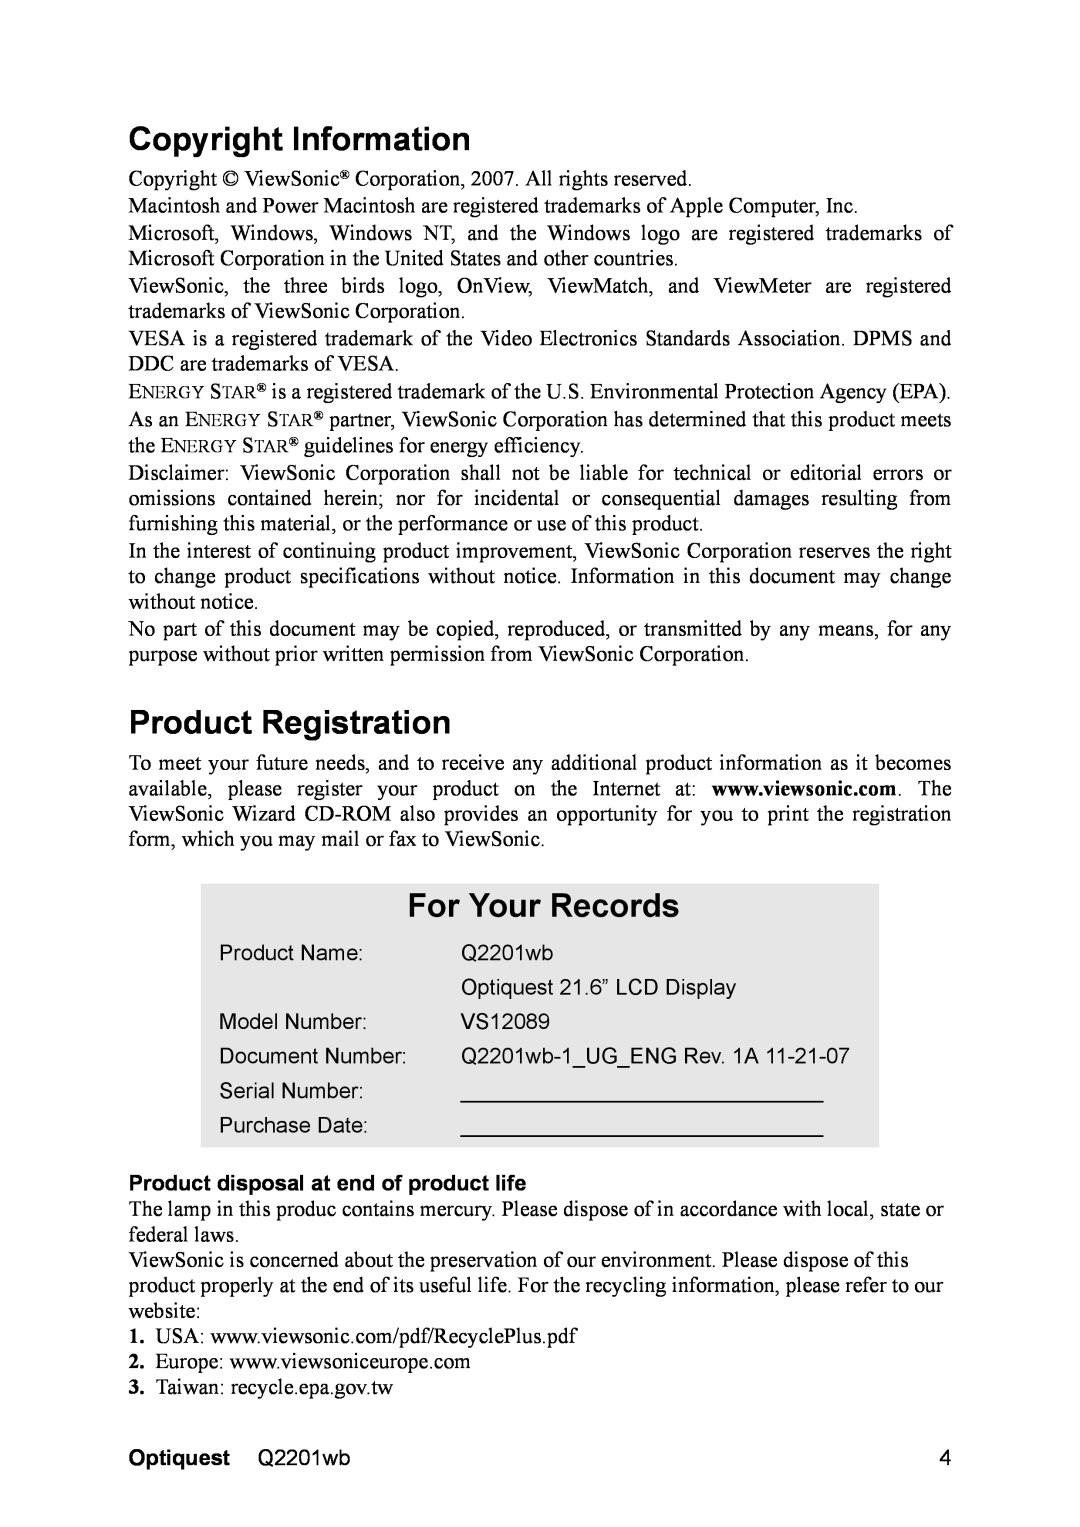 ViewSonic Q2201WB Copyright Information, Product Registration, For Your Records, Product disposal at end of product life 